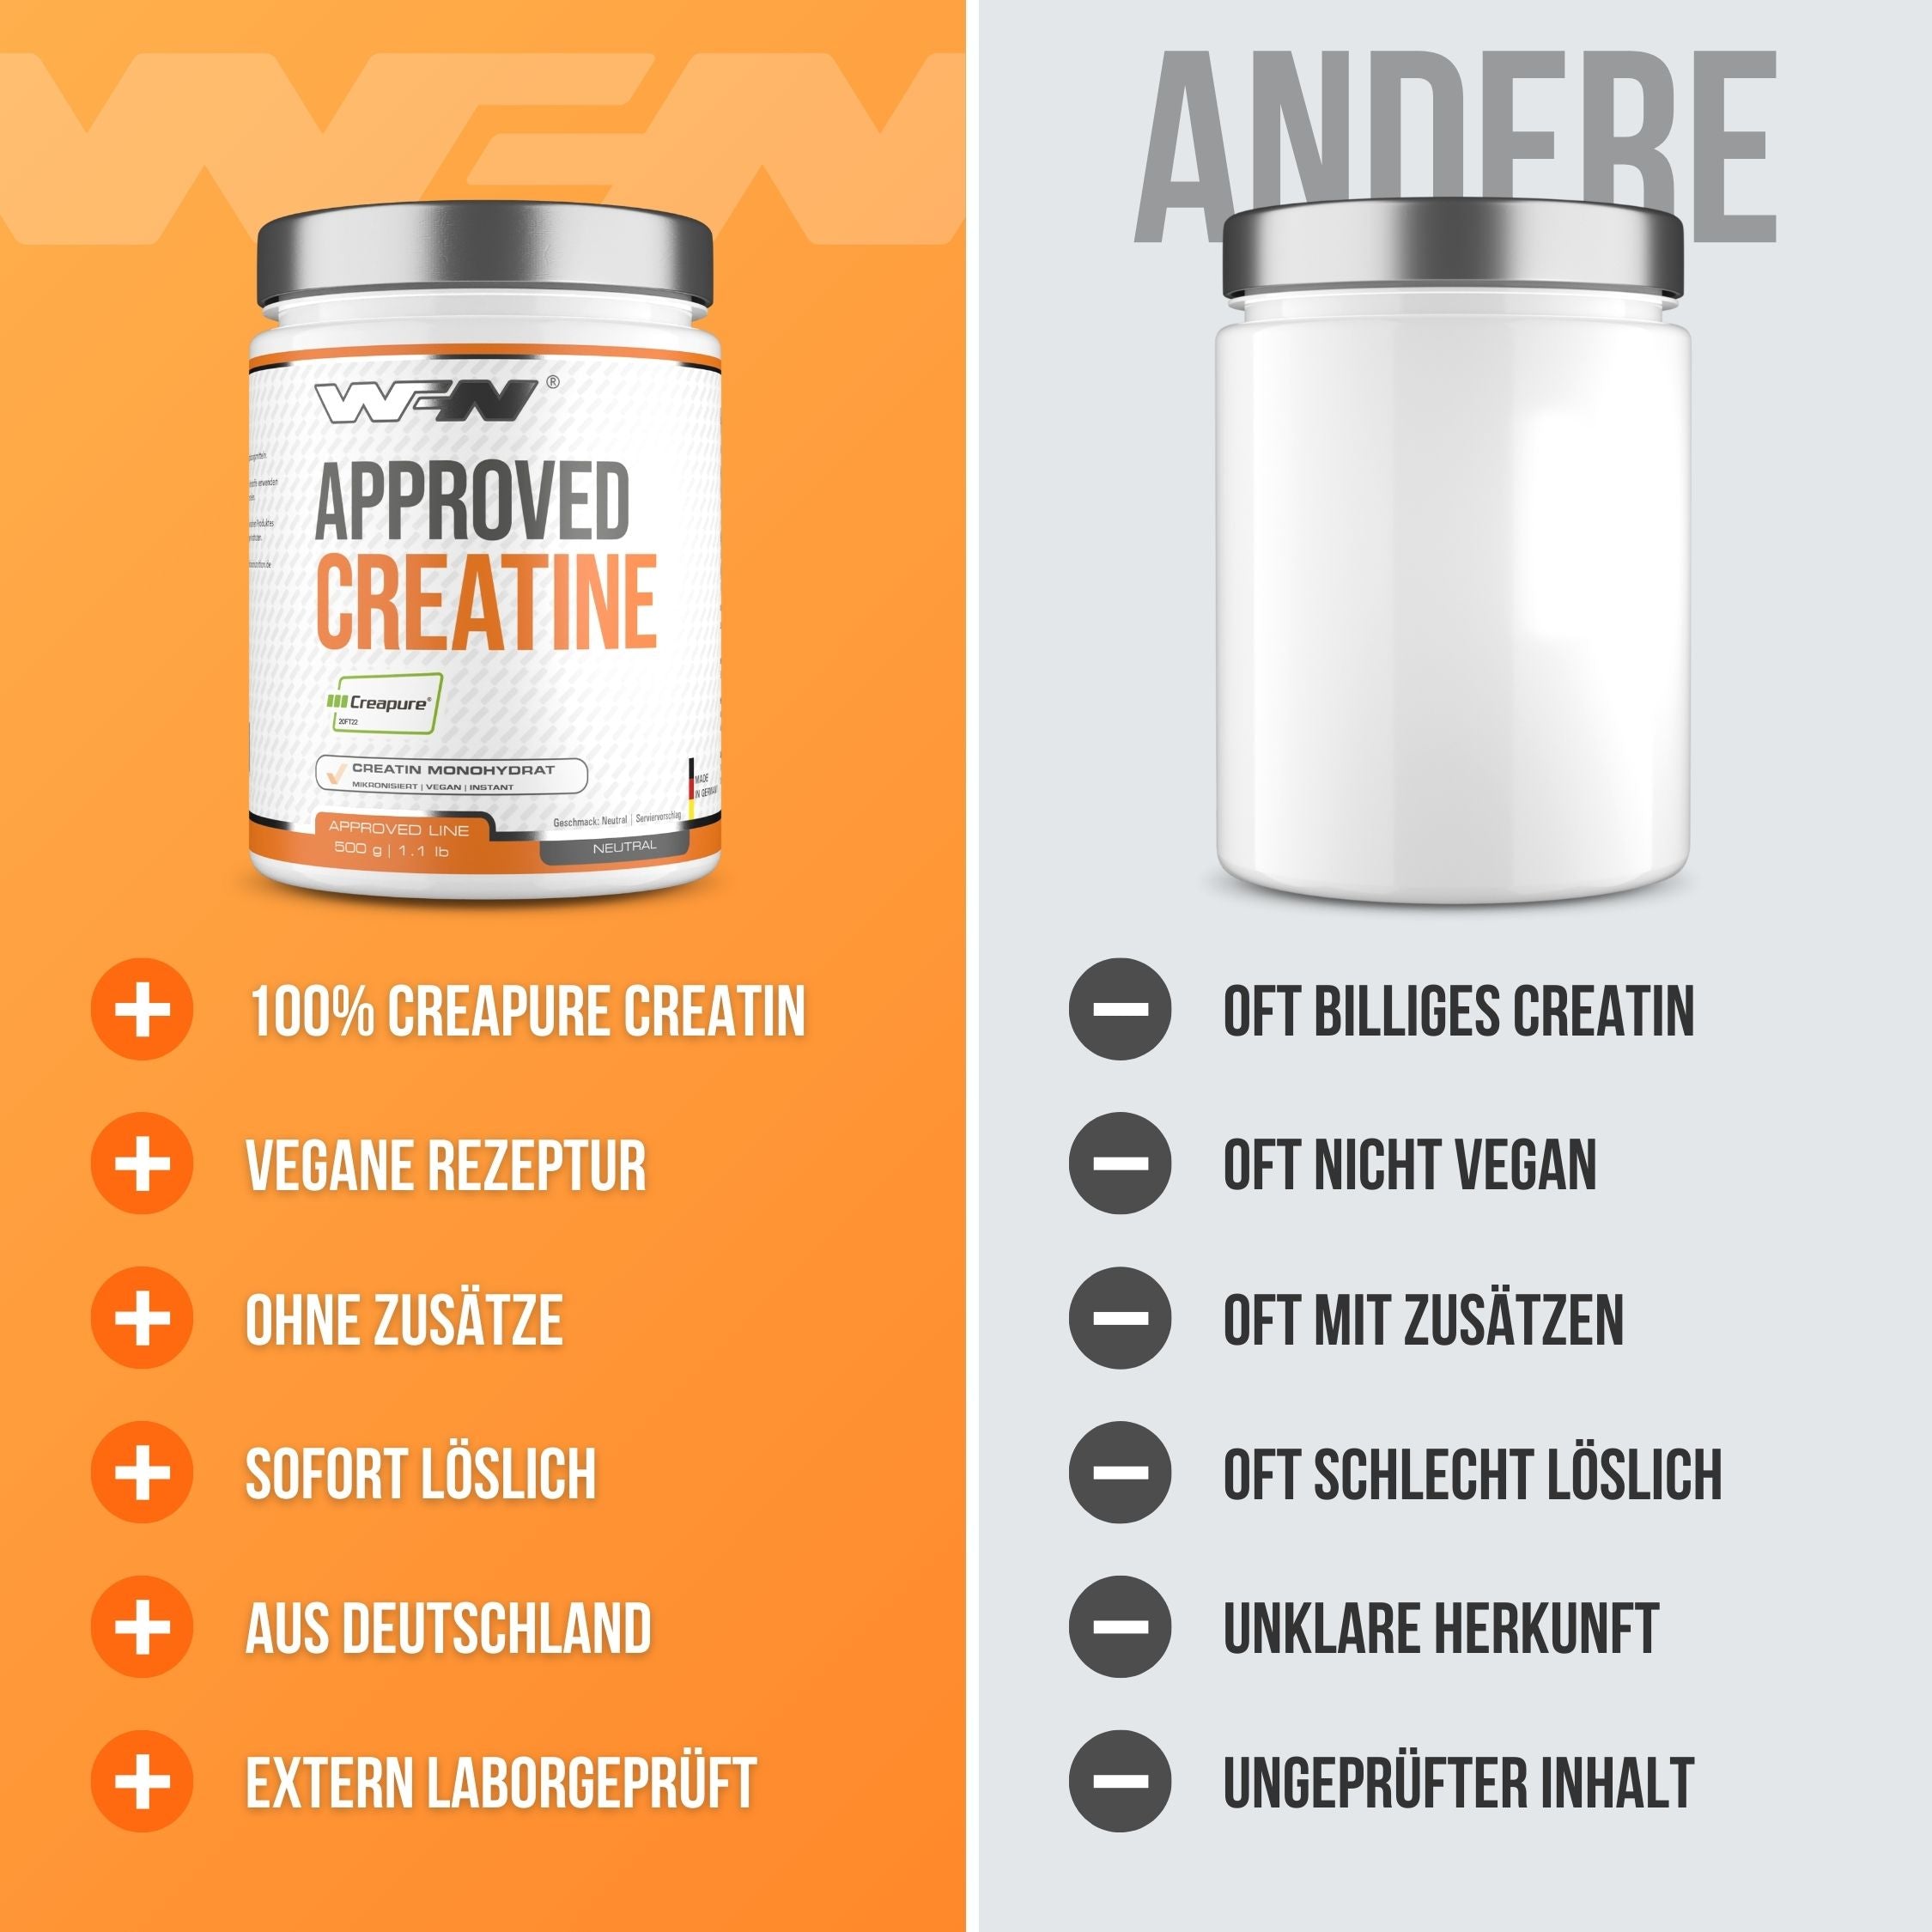 Approved Creatine